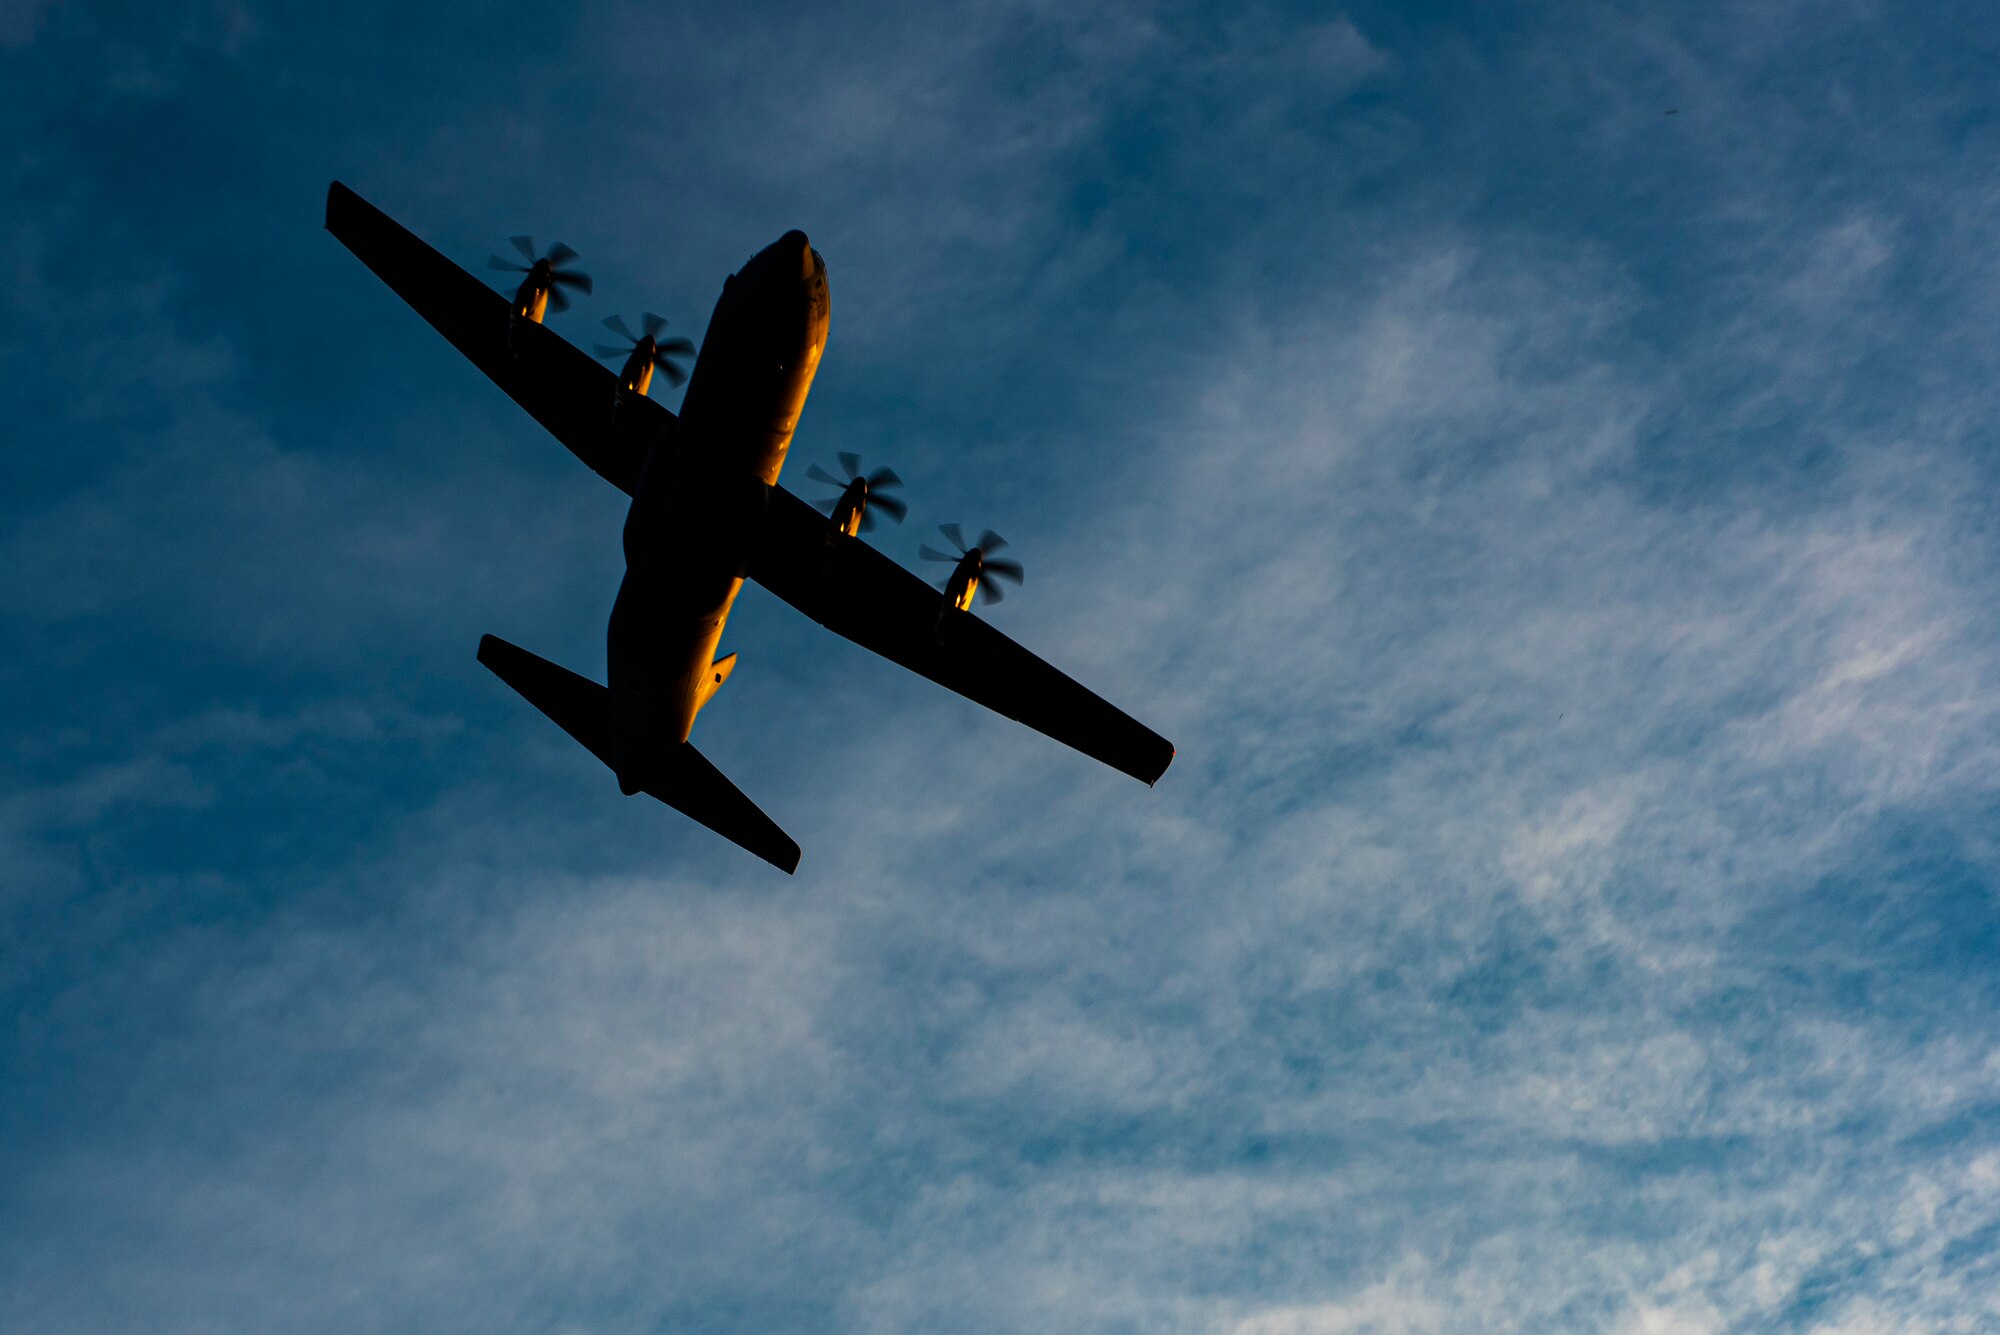 A C-130J Super Hercules flies over the flightline at Dyess Air Force Base, Texas, June 3, 2020. The 317th Airlift Wing recently finished the first round of the new 4/12 C-130 deployment cycle. The 4/12 deployment cycle allows an entire C-130J airlift squadron and their associated maintenance unit to deploy for four months, which allows Airmen a 12 month dwell time at home station before the next scheduled deployment. (U.S. Air Force photo by Airman 1st Class Colin Hollowell)